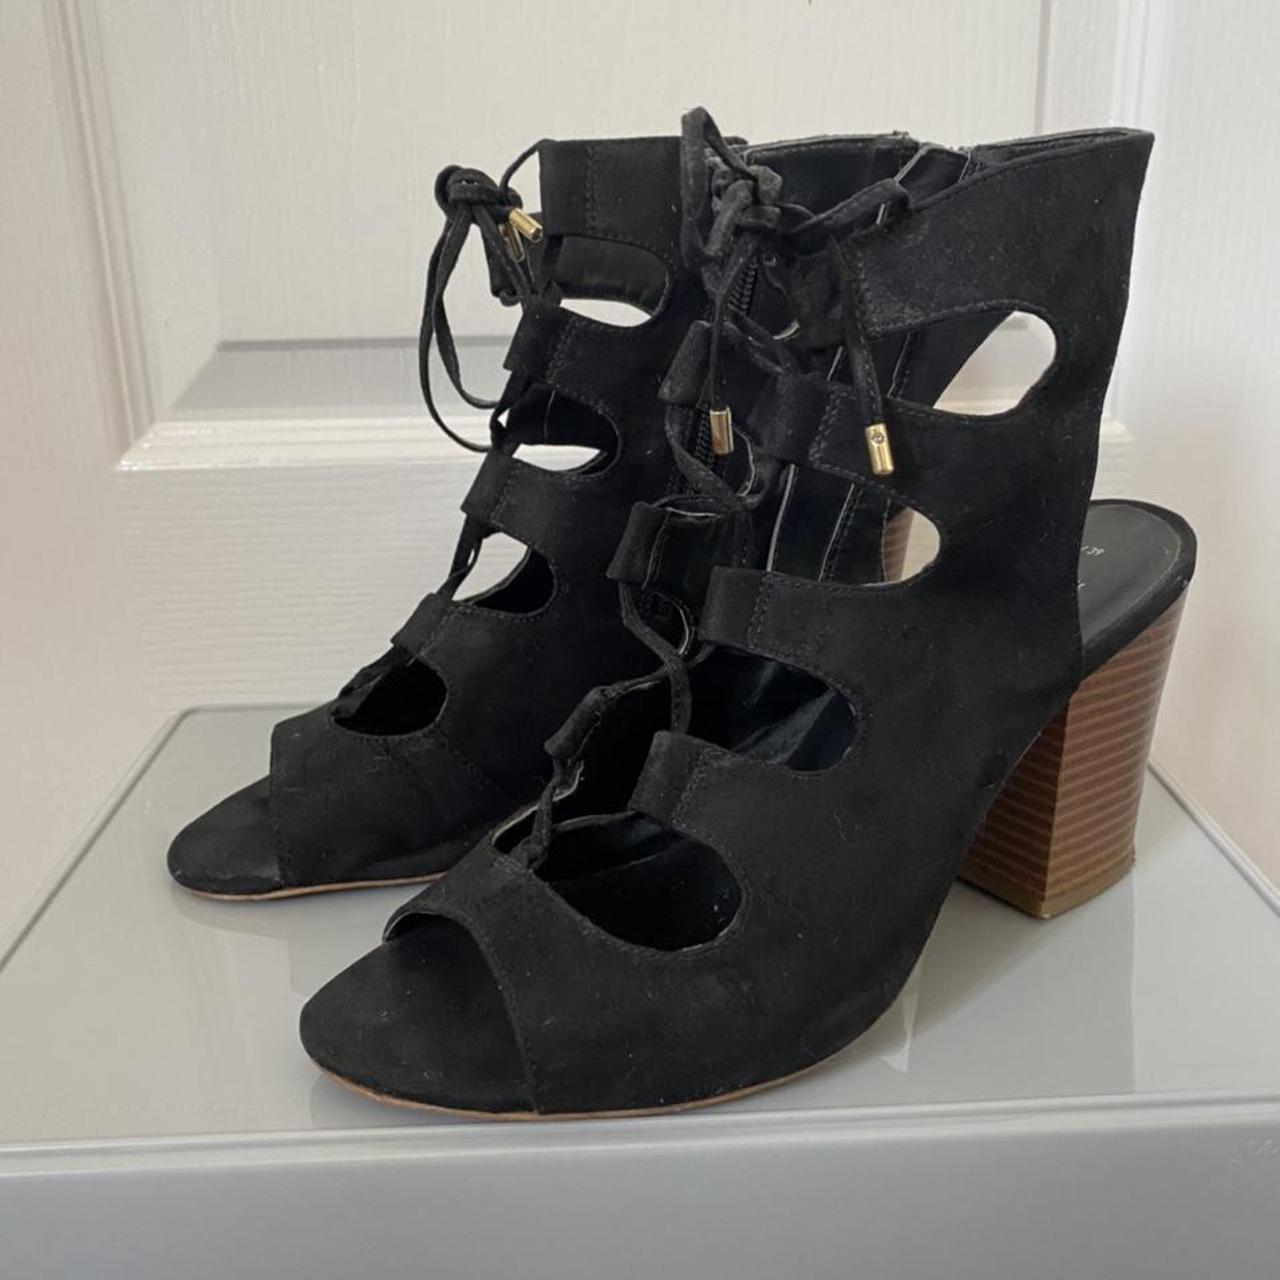 WIDE FIT, black open toe lace up heels with brown... - Depop